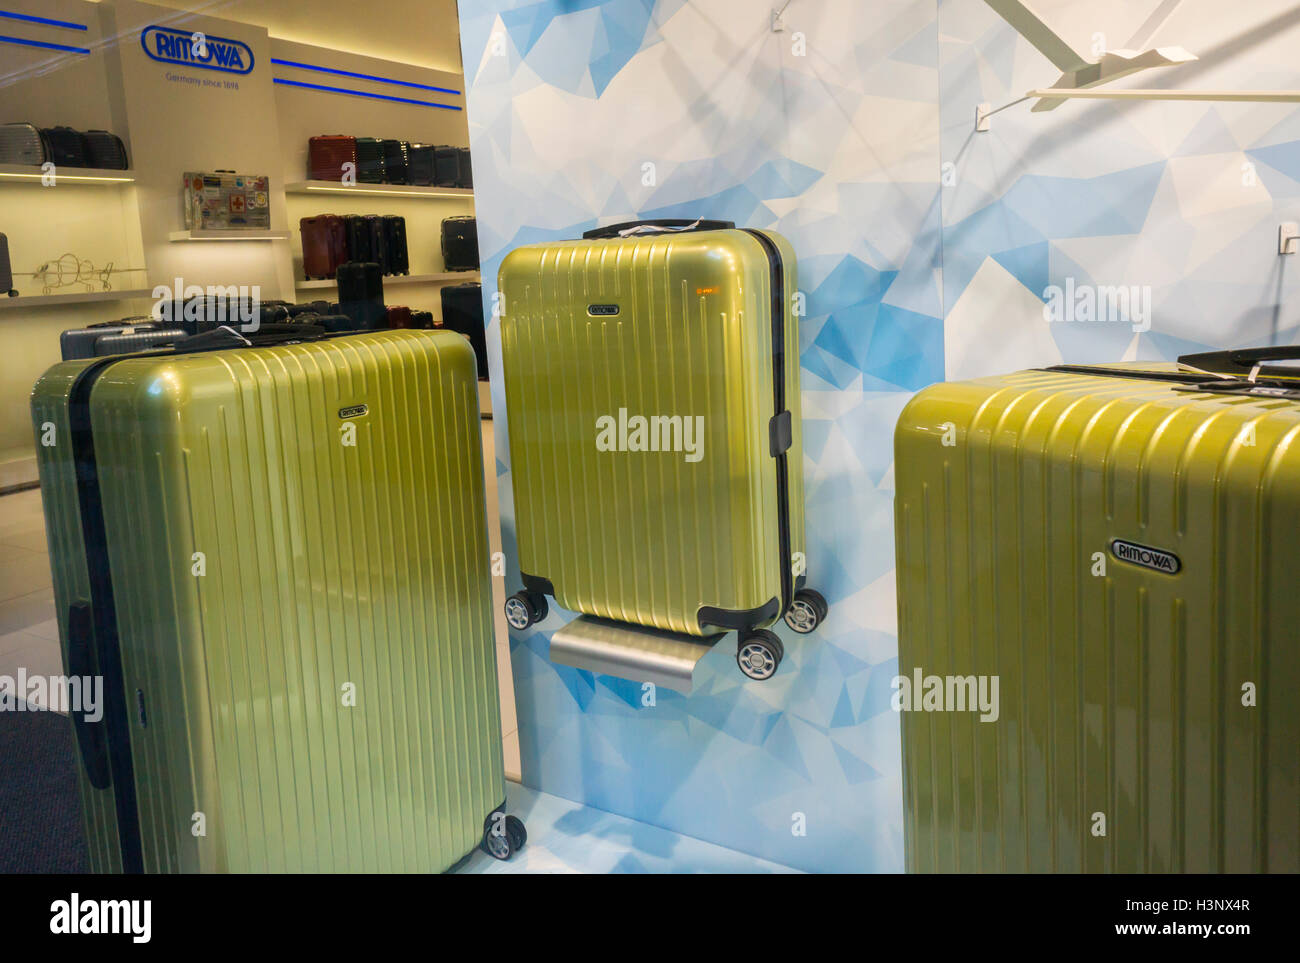 A Rimowa luggage store in New York on Wednesday, October 5, 2016. LVMH, the French luxury group, will buy an 80 percent stake in the German luggage manufacturer Rimowa for $716 million. Rimowa has been making luggage since 1898.(© Richard B. Levine) Stock Photo